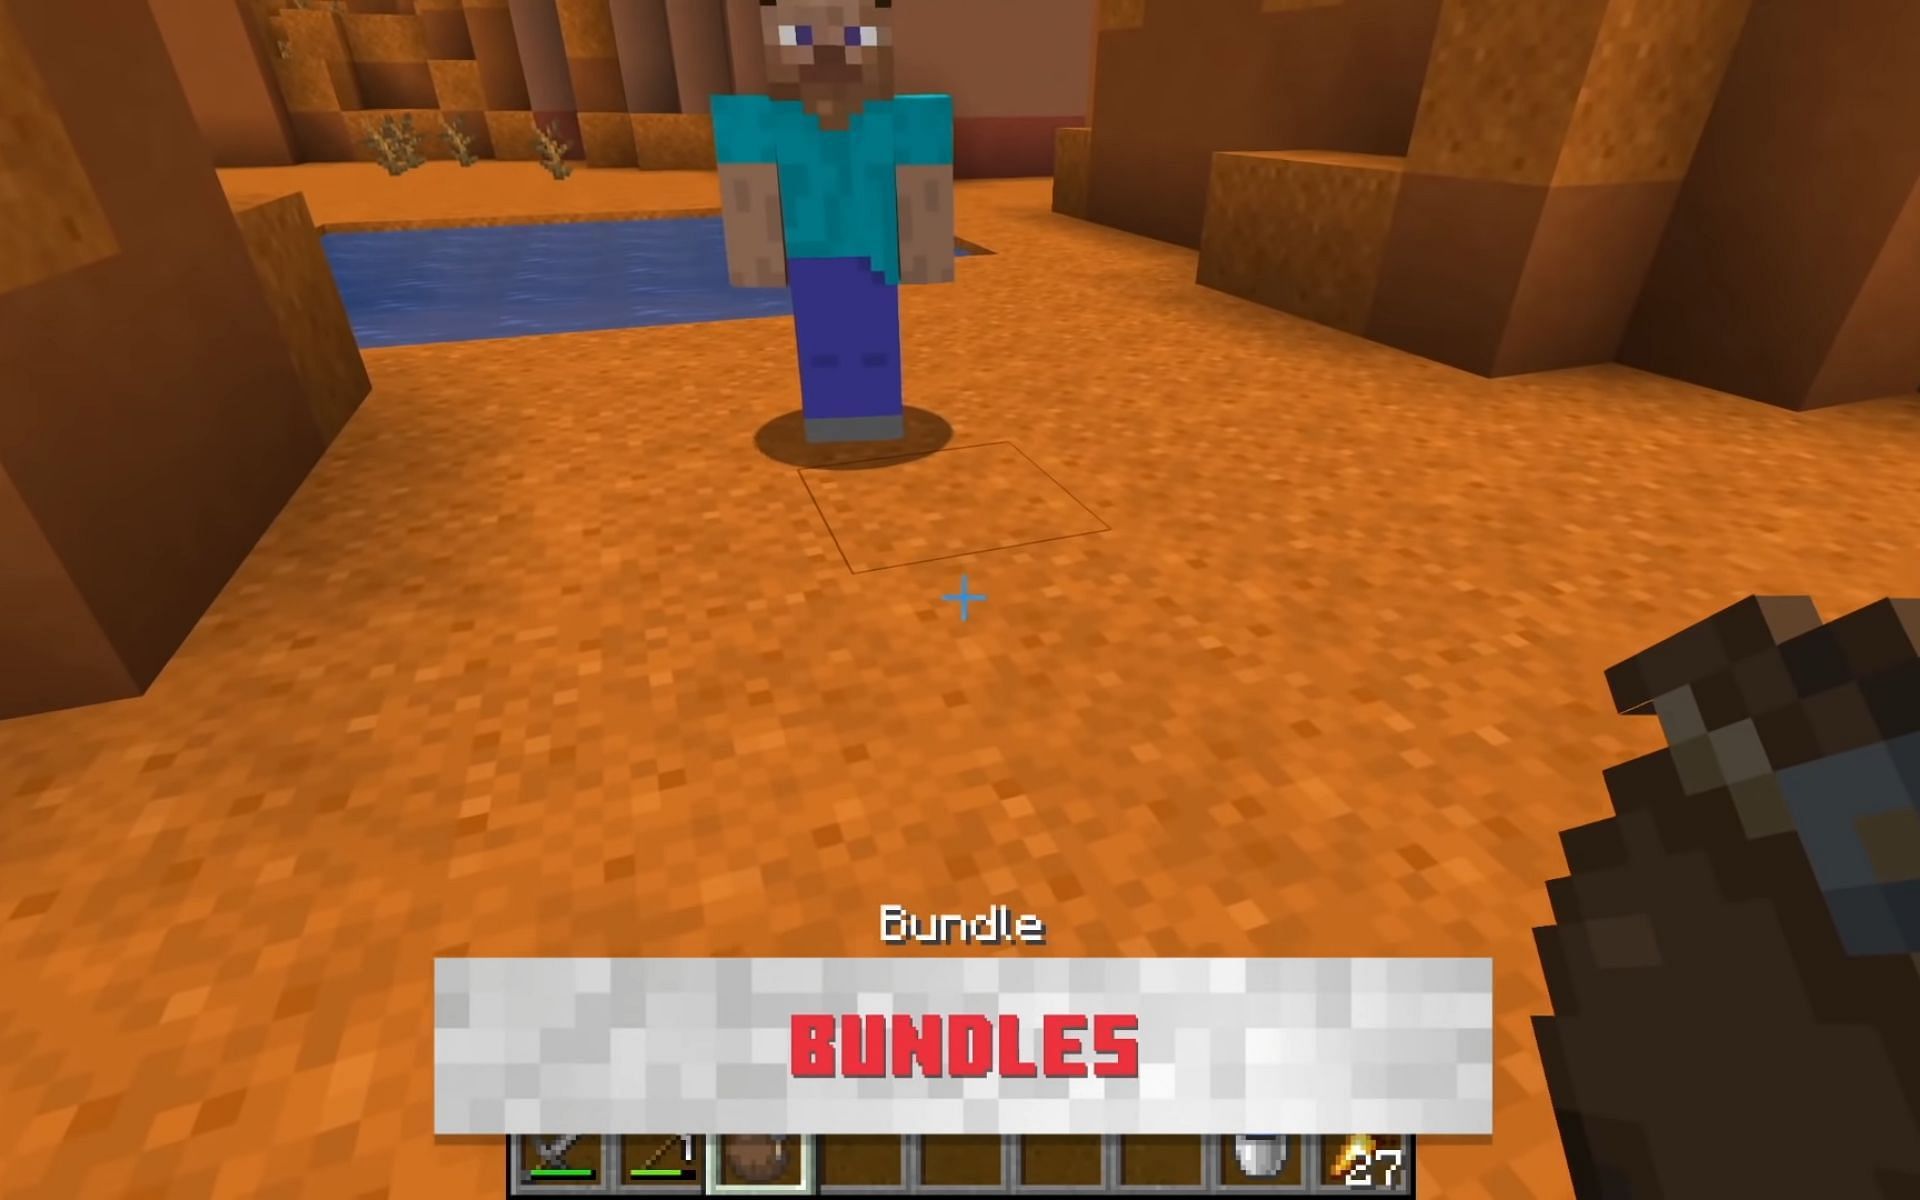 Bundles first introduction in Live event 2020 (Image via Mojang)